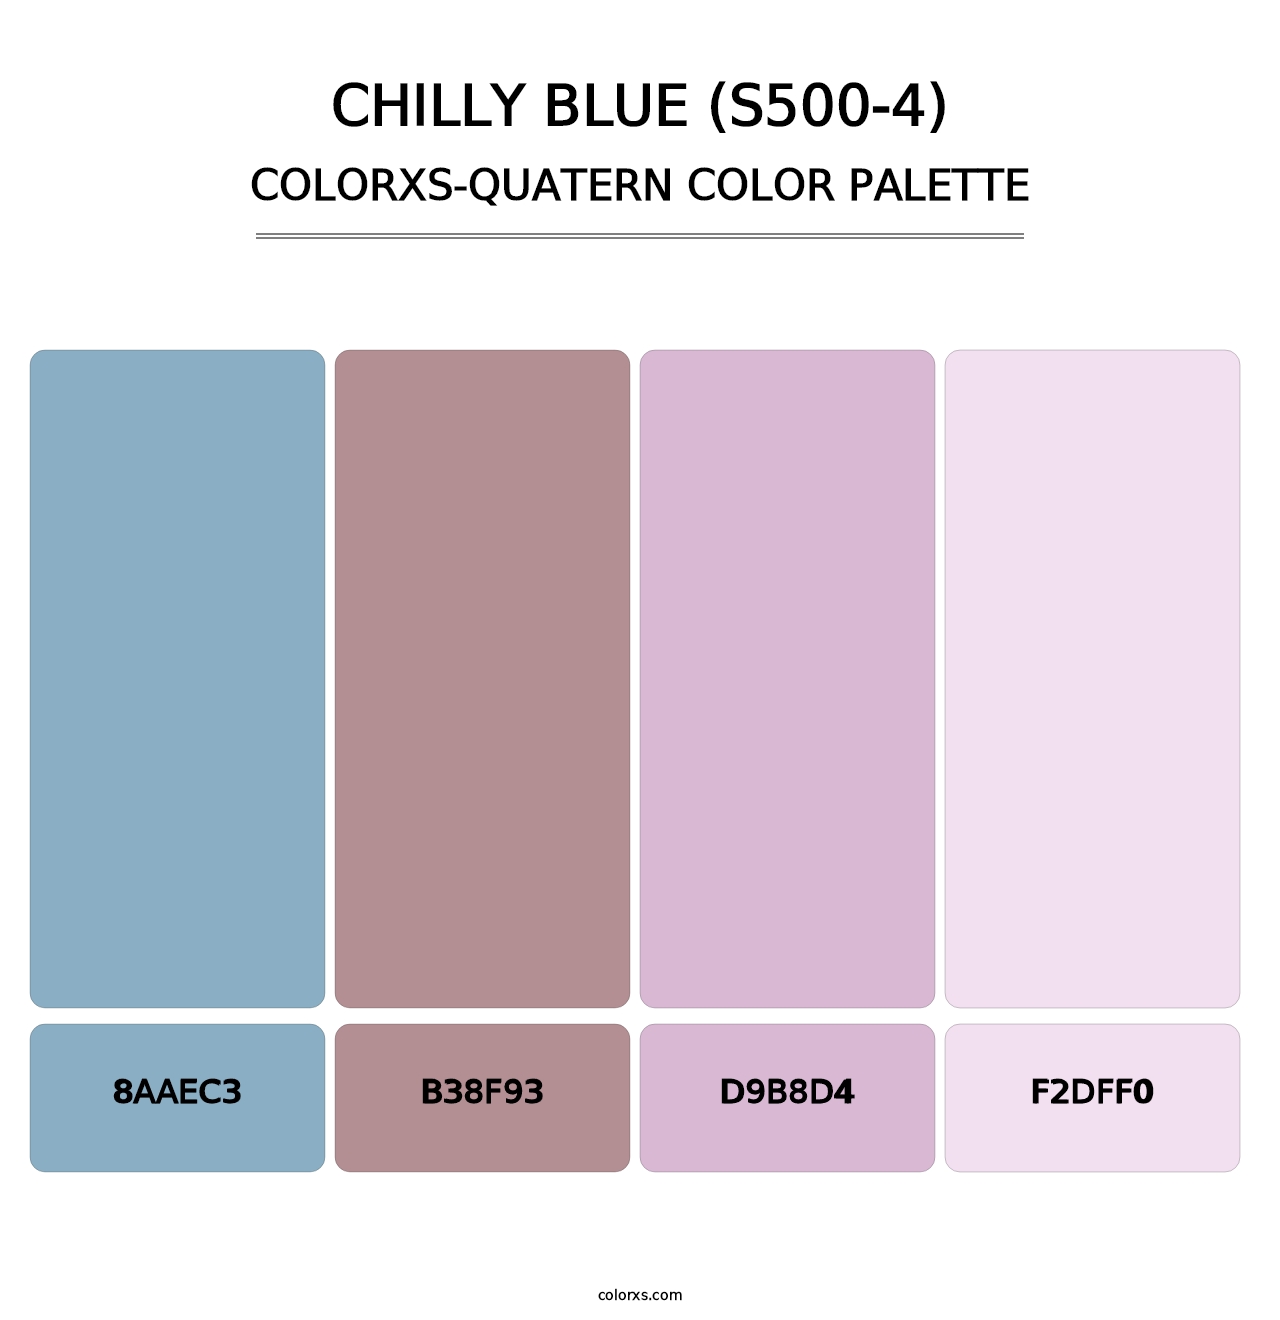 Chilly Blue (S500-4) - Colorxs Quatern Palette